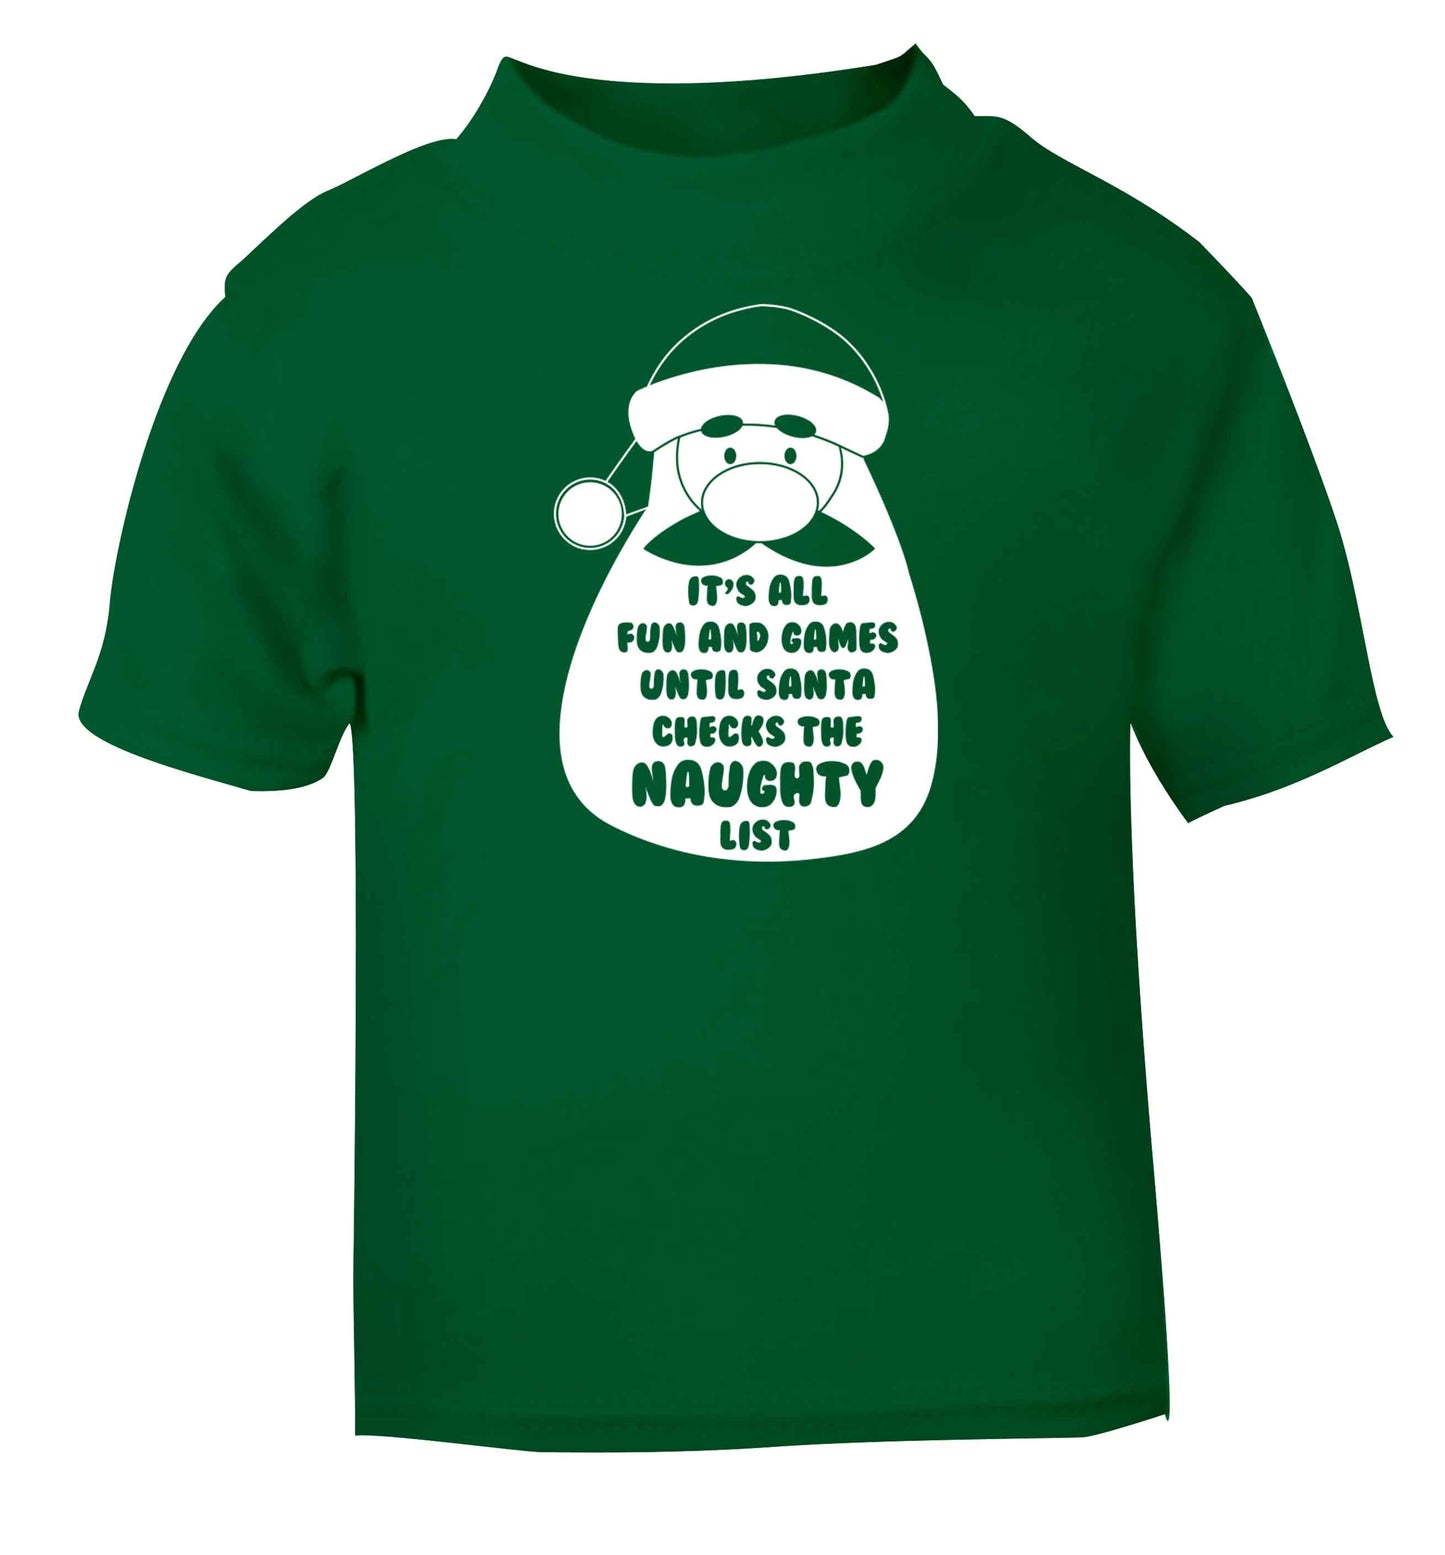 It's all fun and games until Santa checks the naughty list green baby toddler Tshirt 2 Years